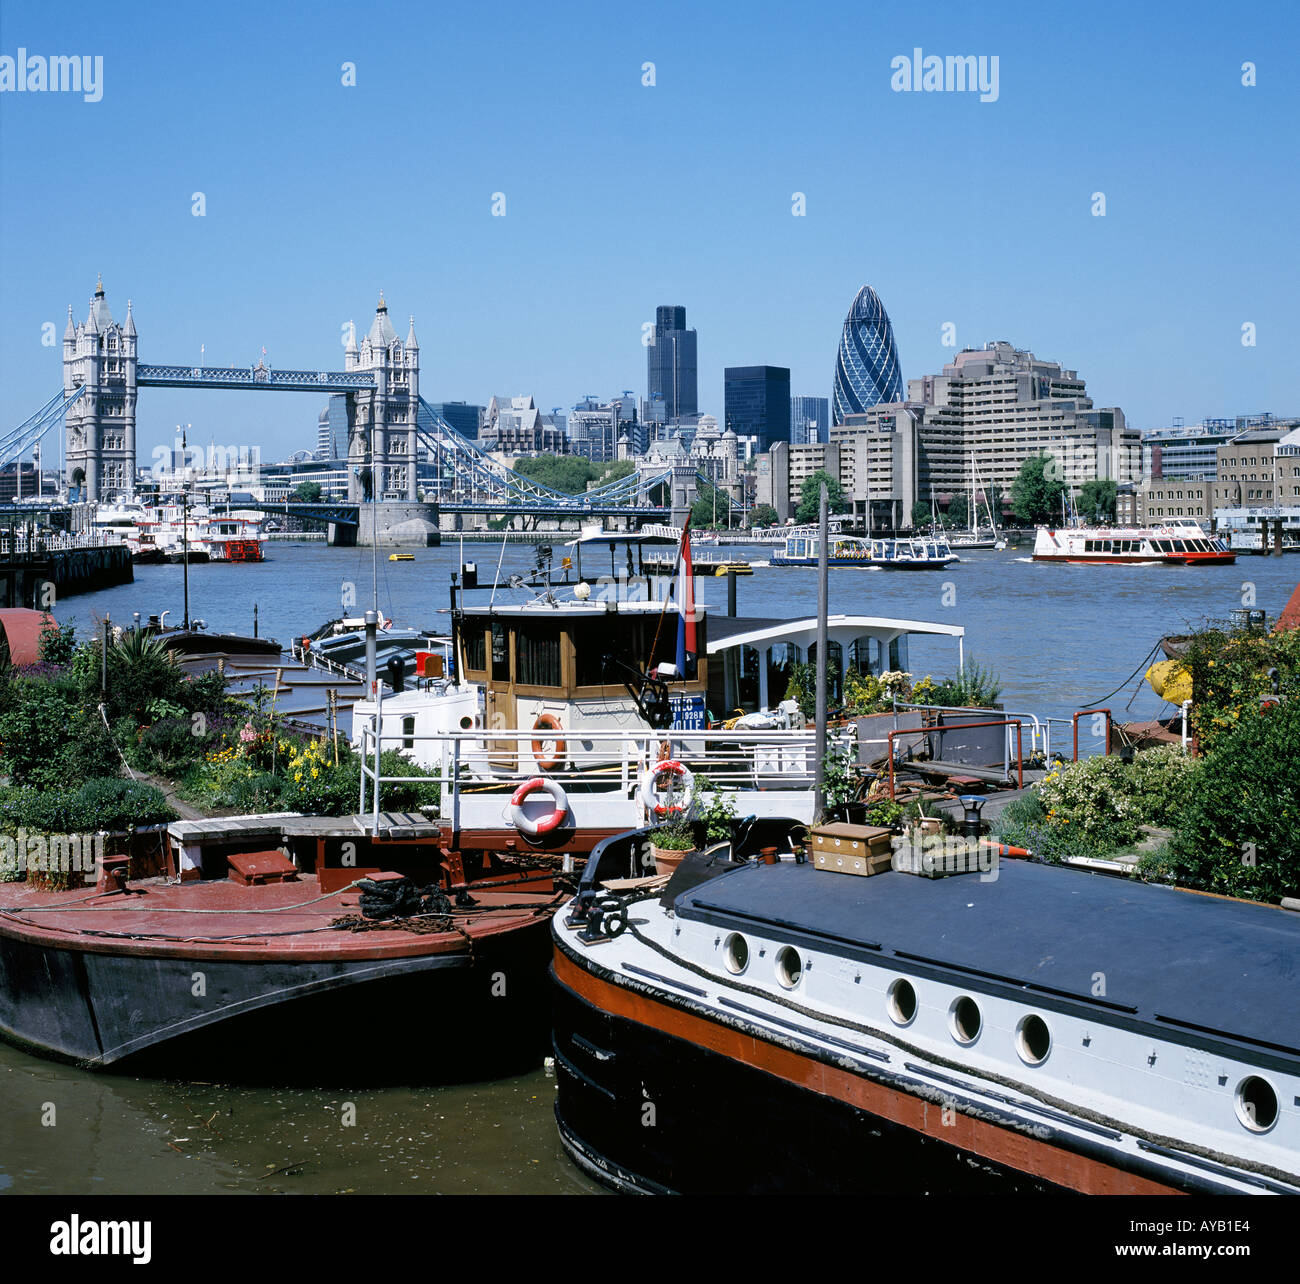 View across River Thames to the City of London and Tower Bridge In the foreground are houseboats Stock Photo